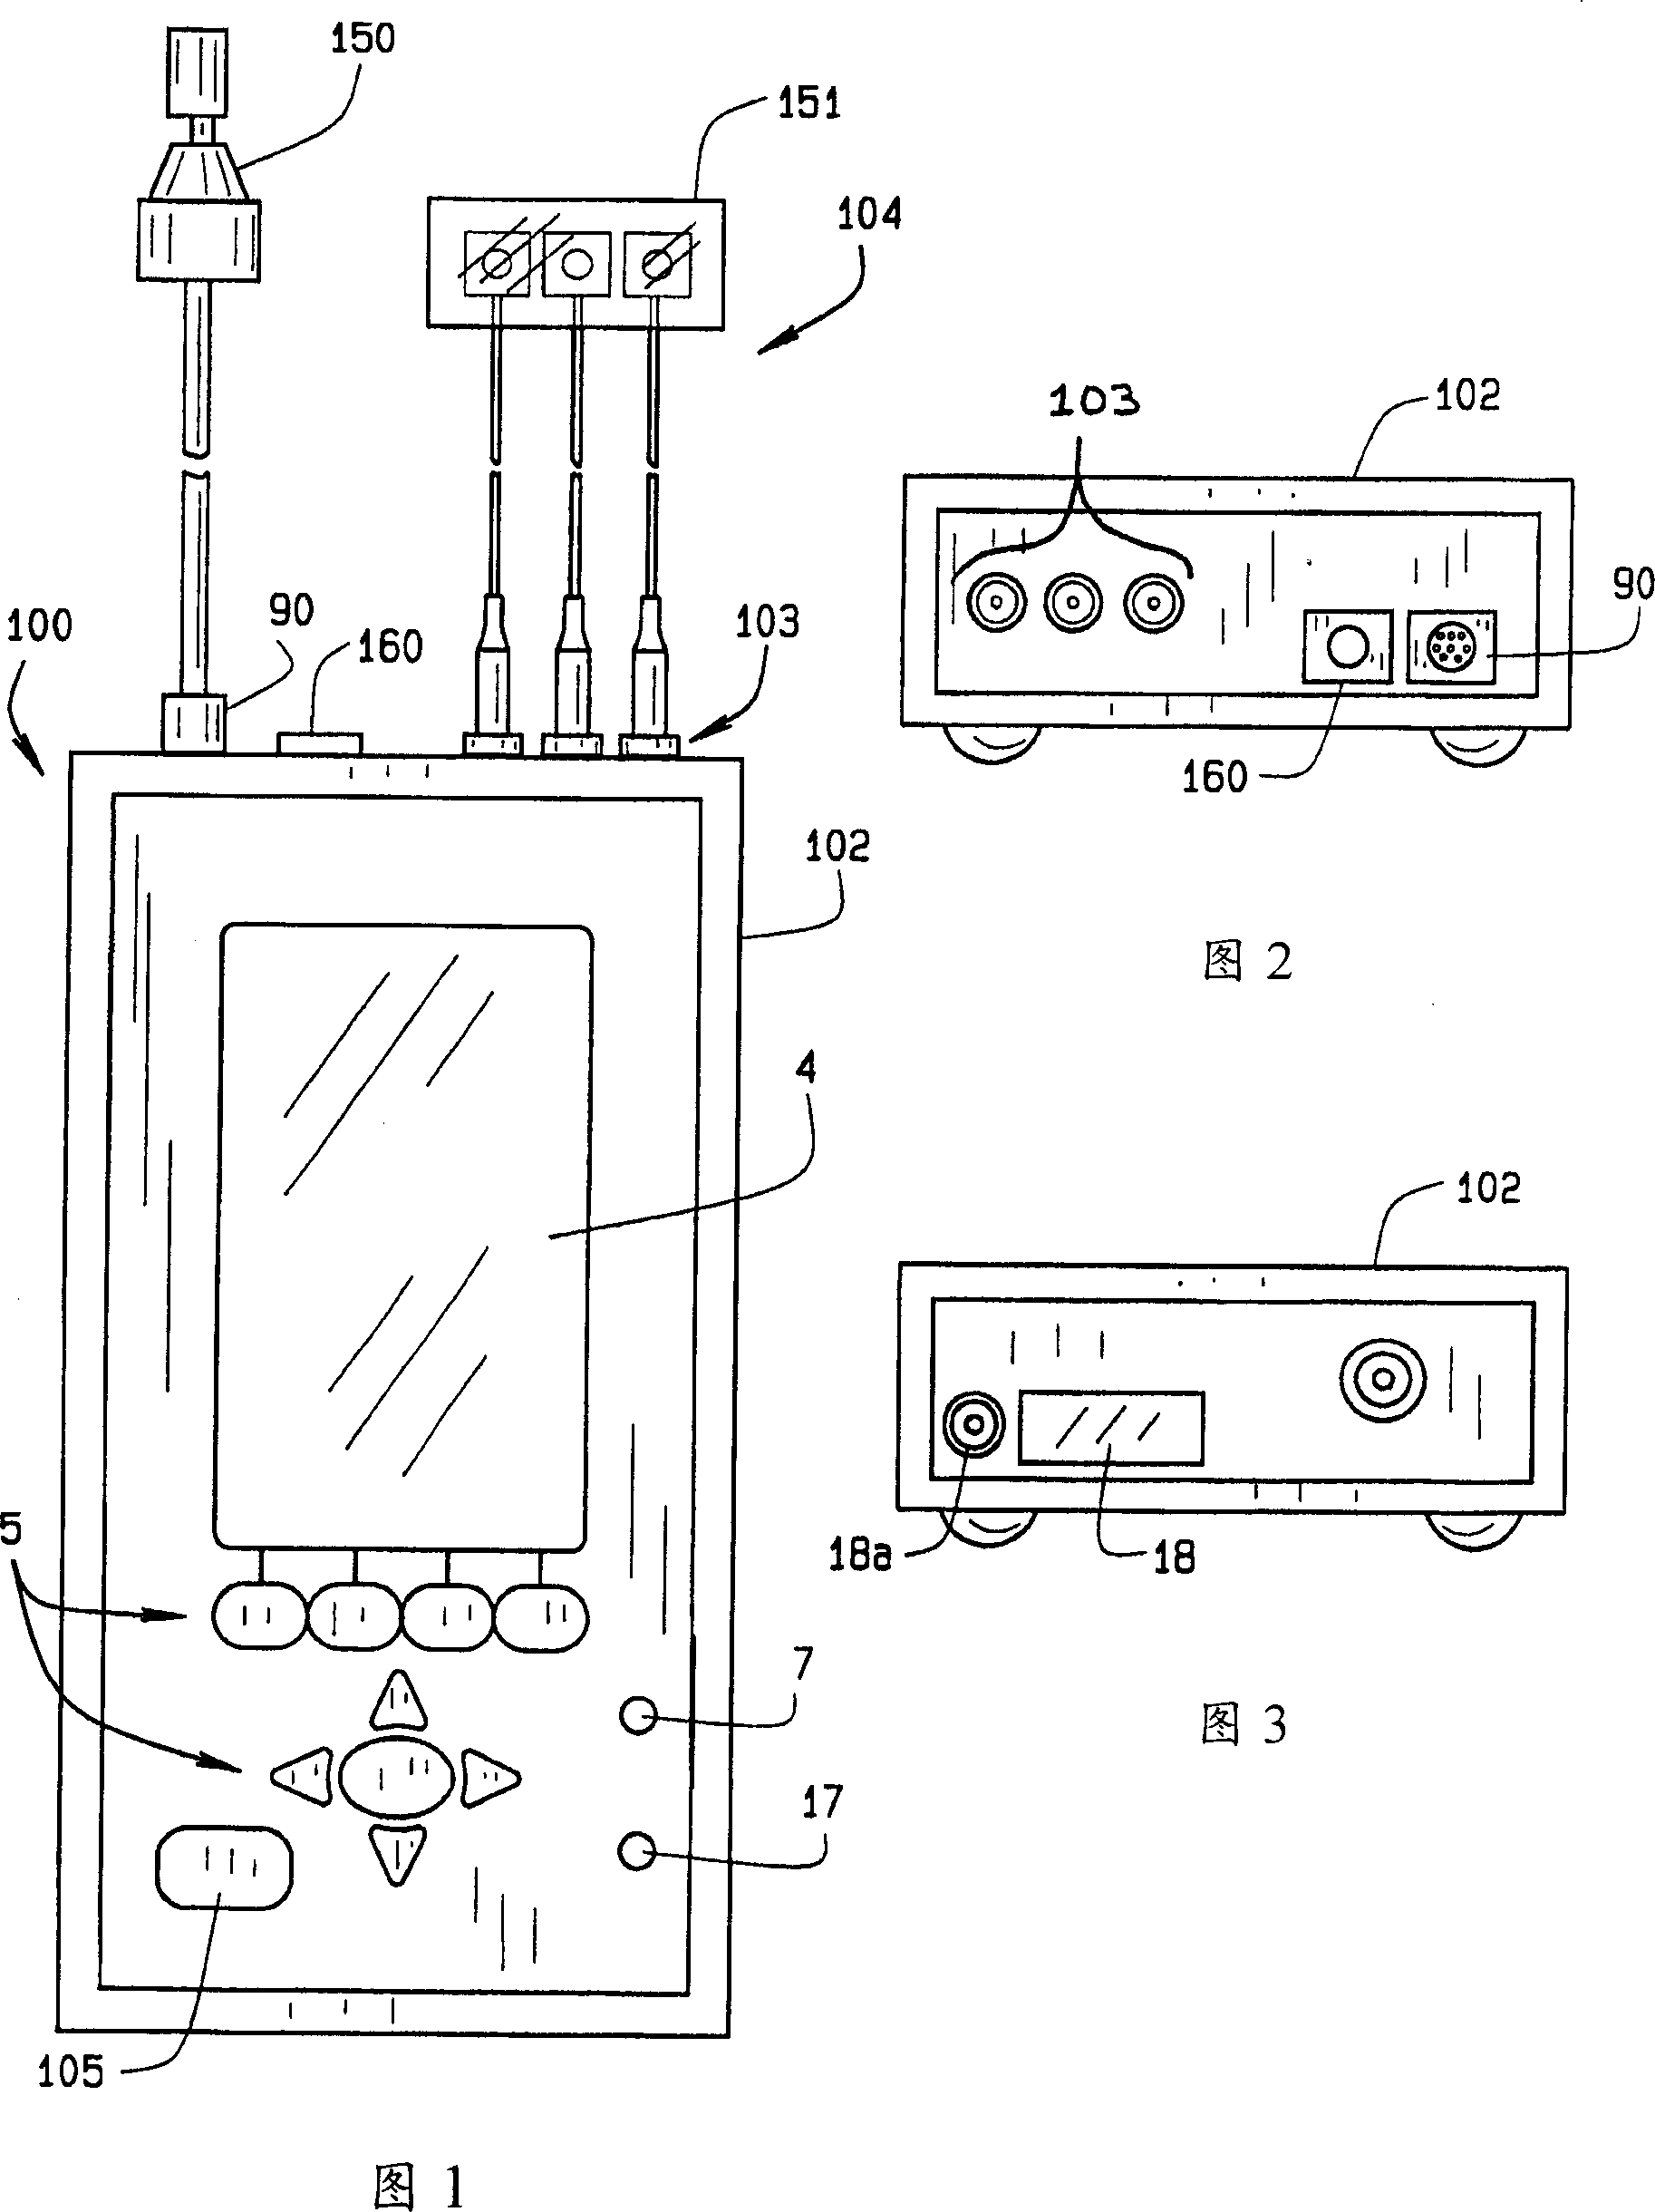 Handheld audiometric device and method of testing hearing